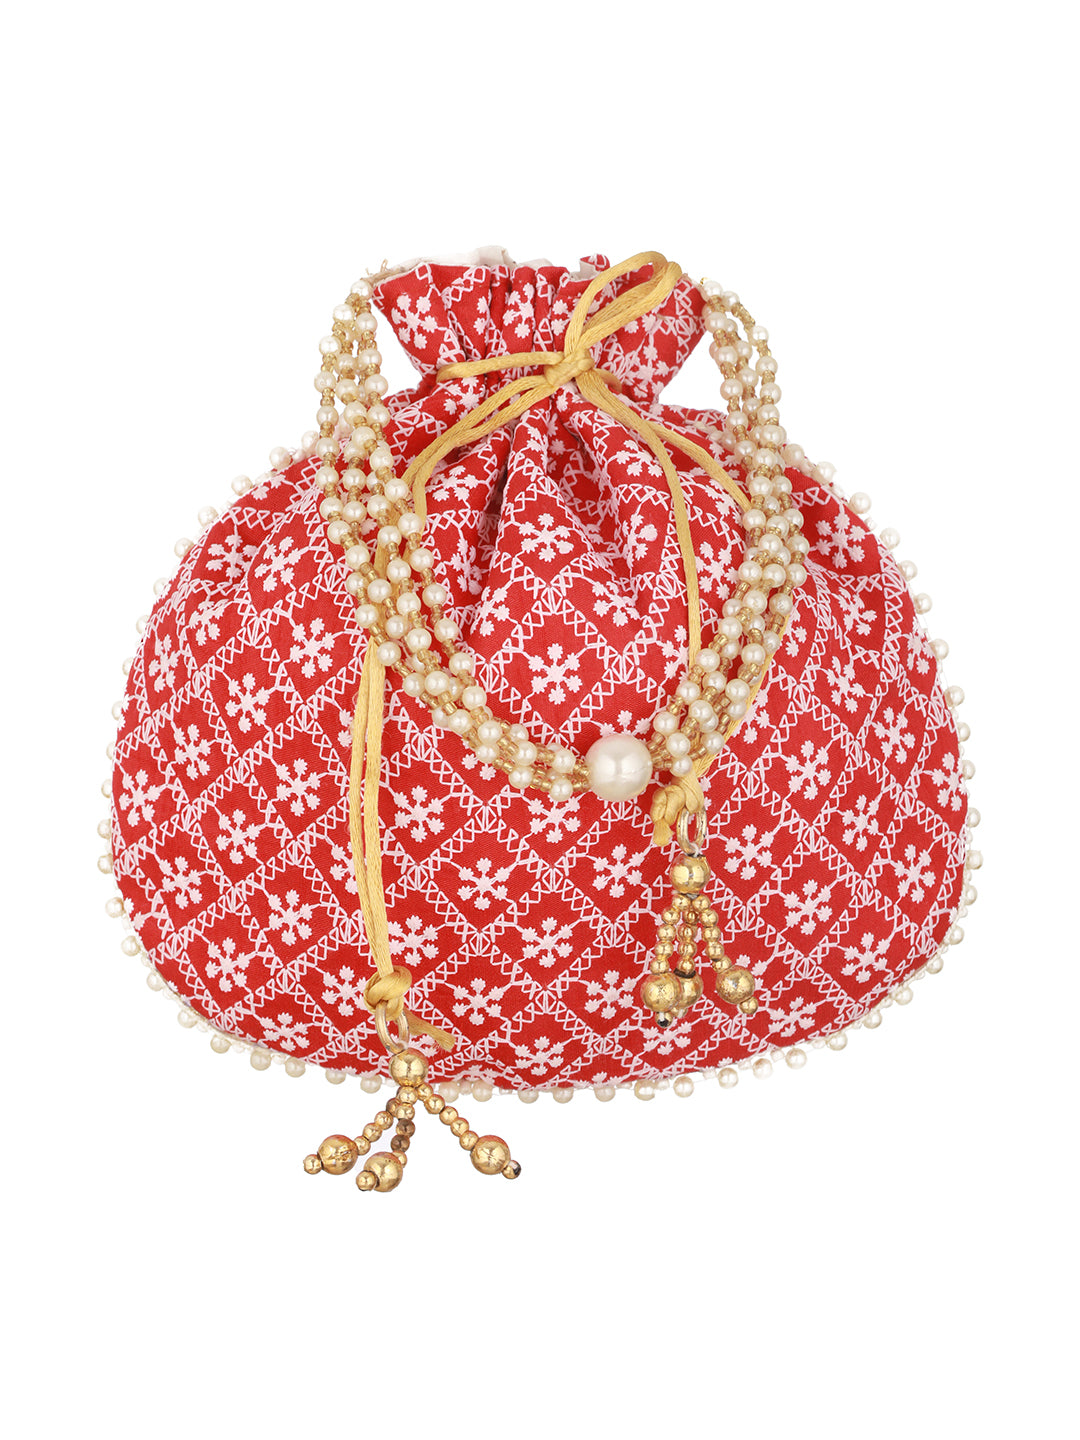 Red & Gold-Toned Chikan Embroidered work Potli Clutch